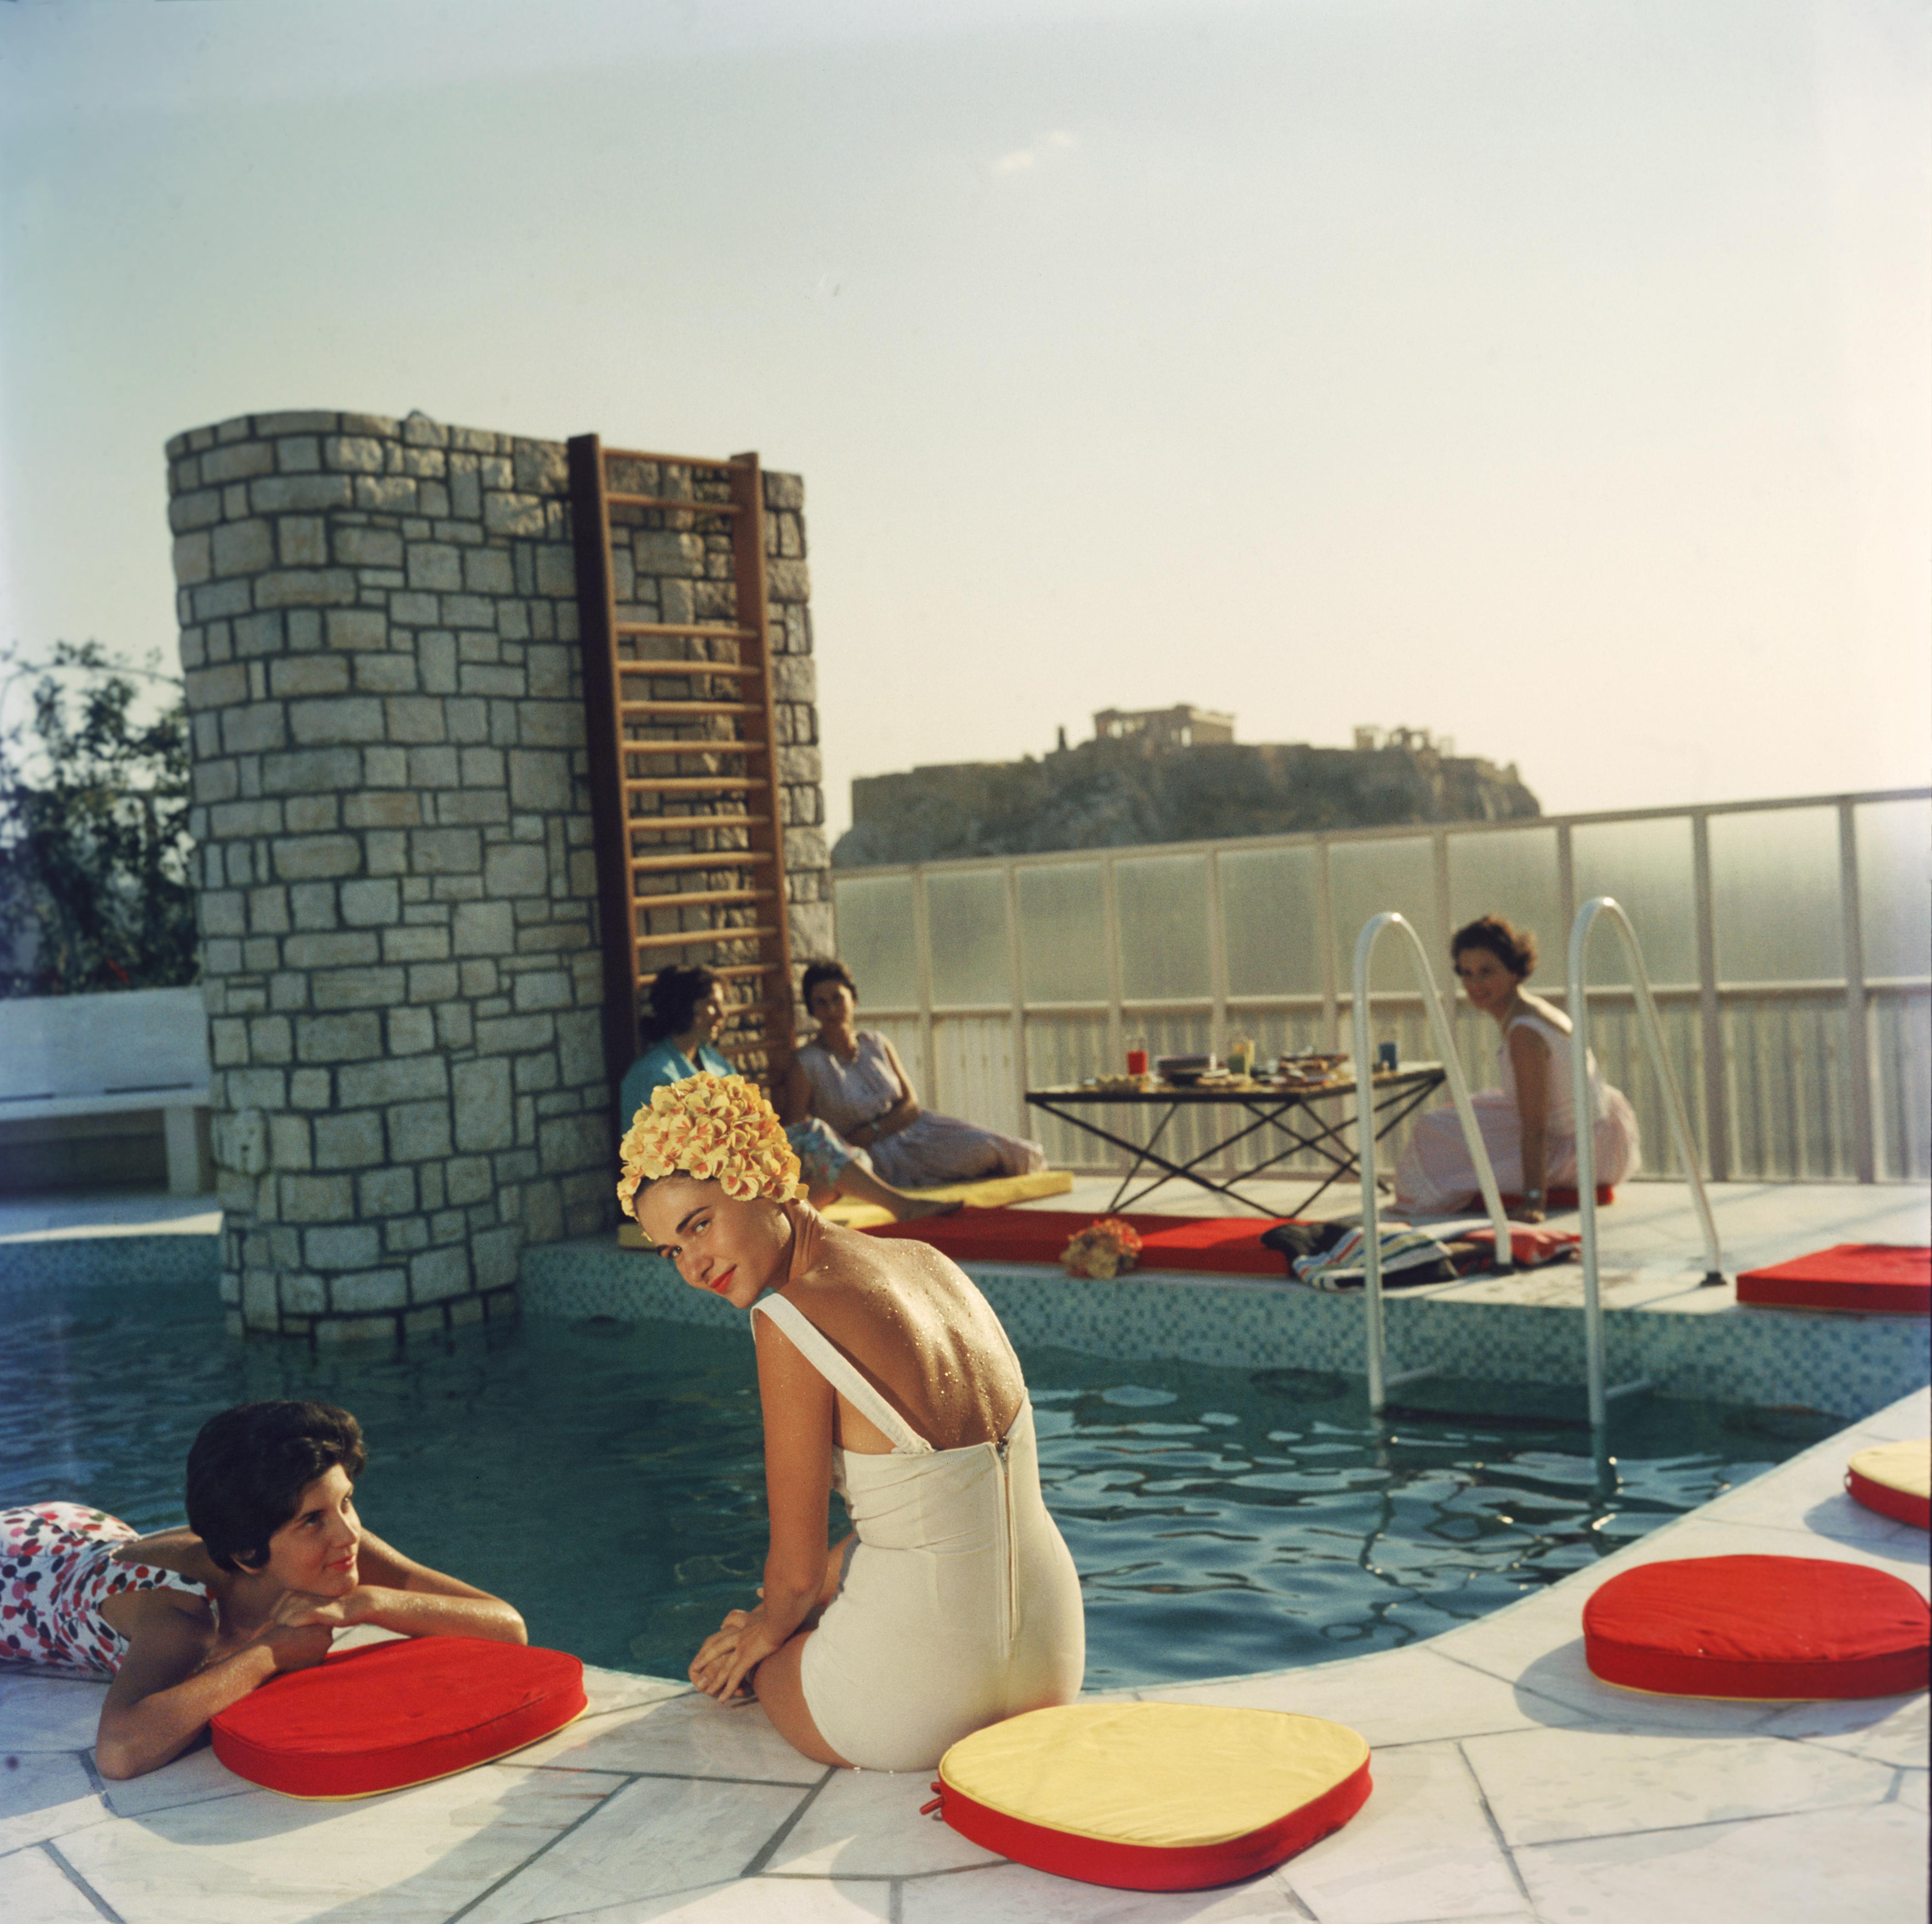 'Penthouse Pool' 1961 Slim Aarons Limited Estate Edition

Young women by the Canellopoulos penthouse pool, Athens, July 1961. 

Produced from the original transparency
Certificate of authenticity supplied 
30x30 inches / 76 x 76 cm paper size